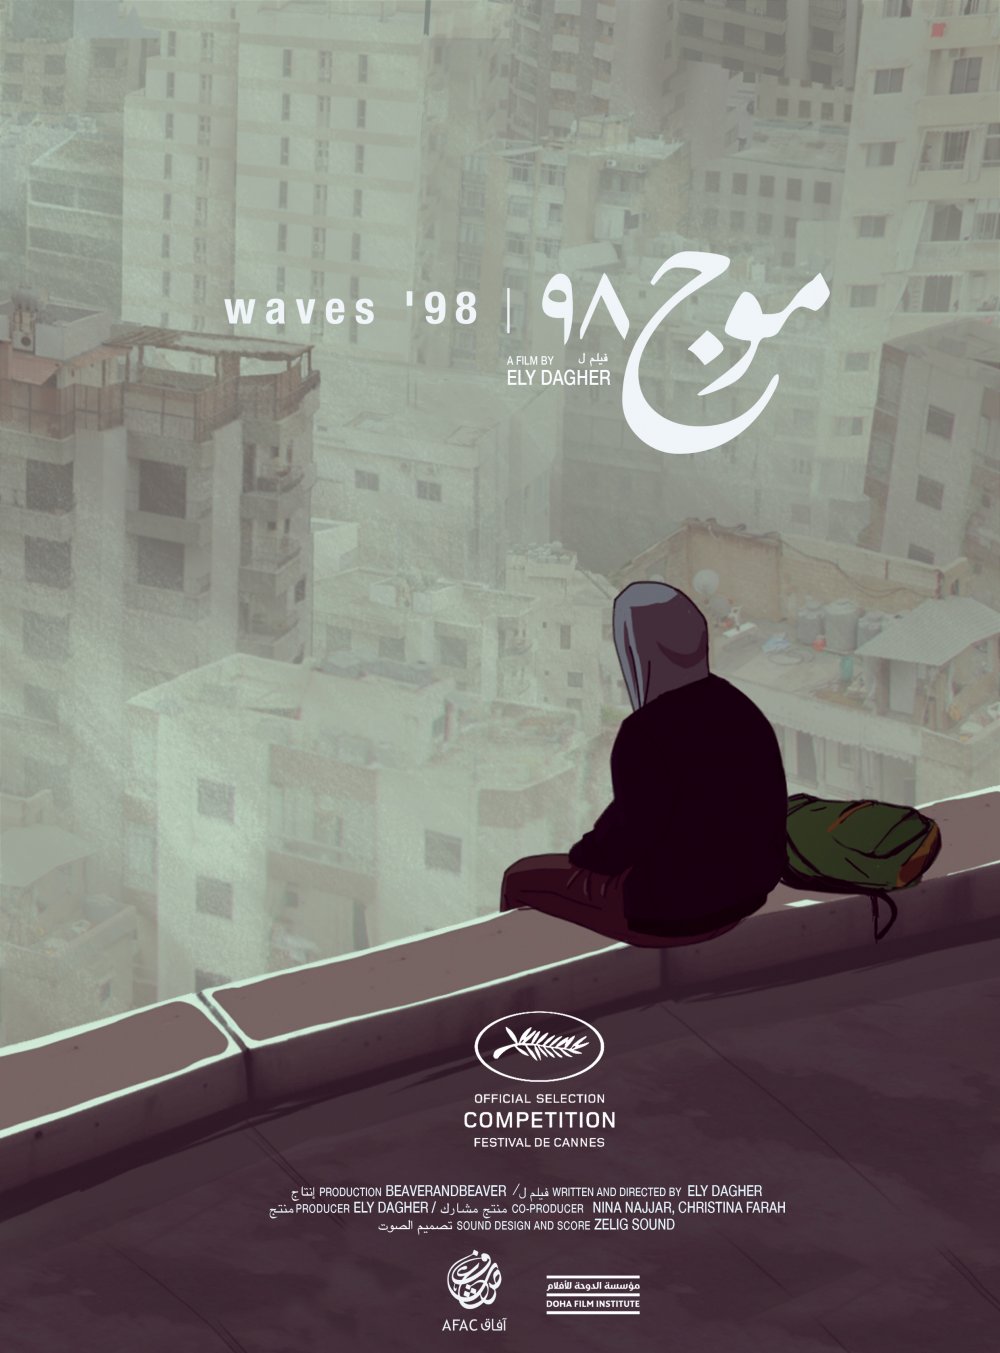 Ely Dagher’s Waves 98, in Cannes’ Short Film Competition